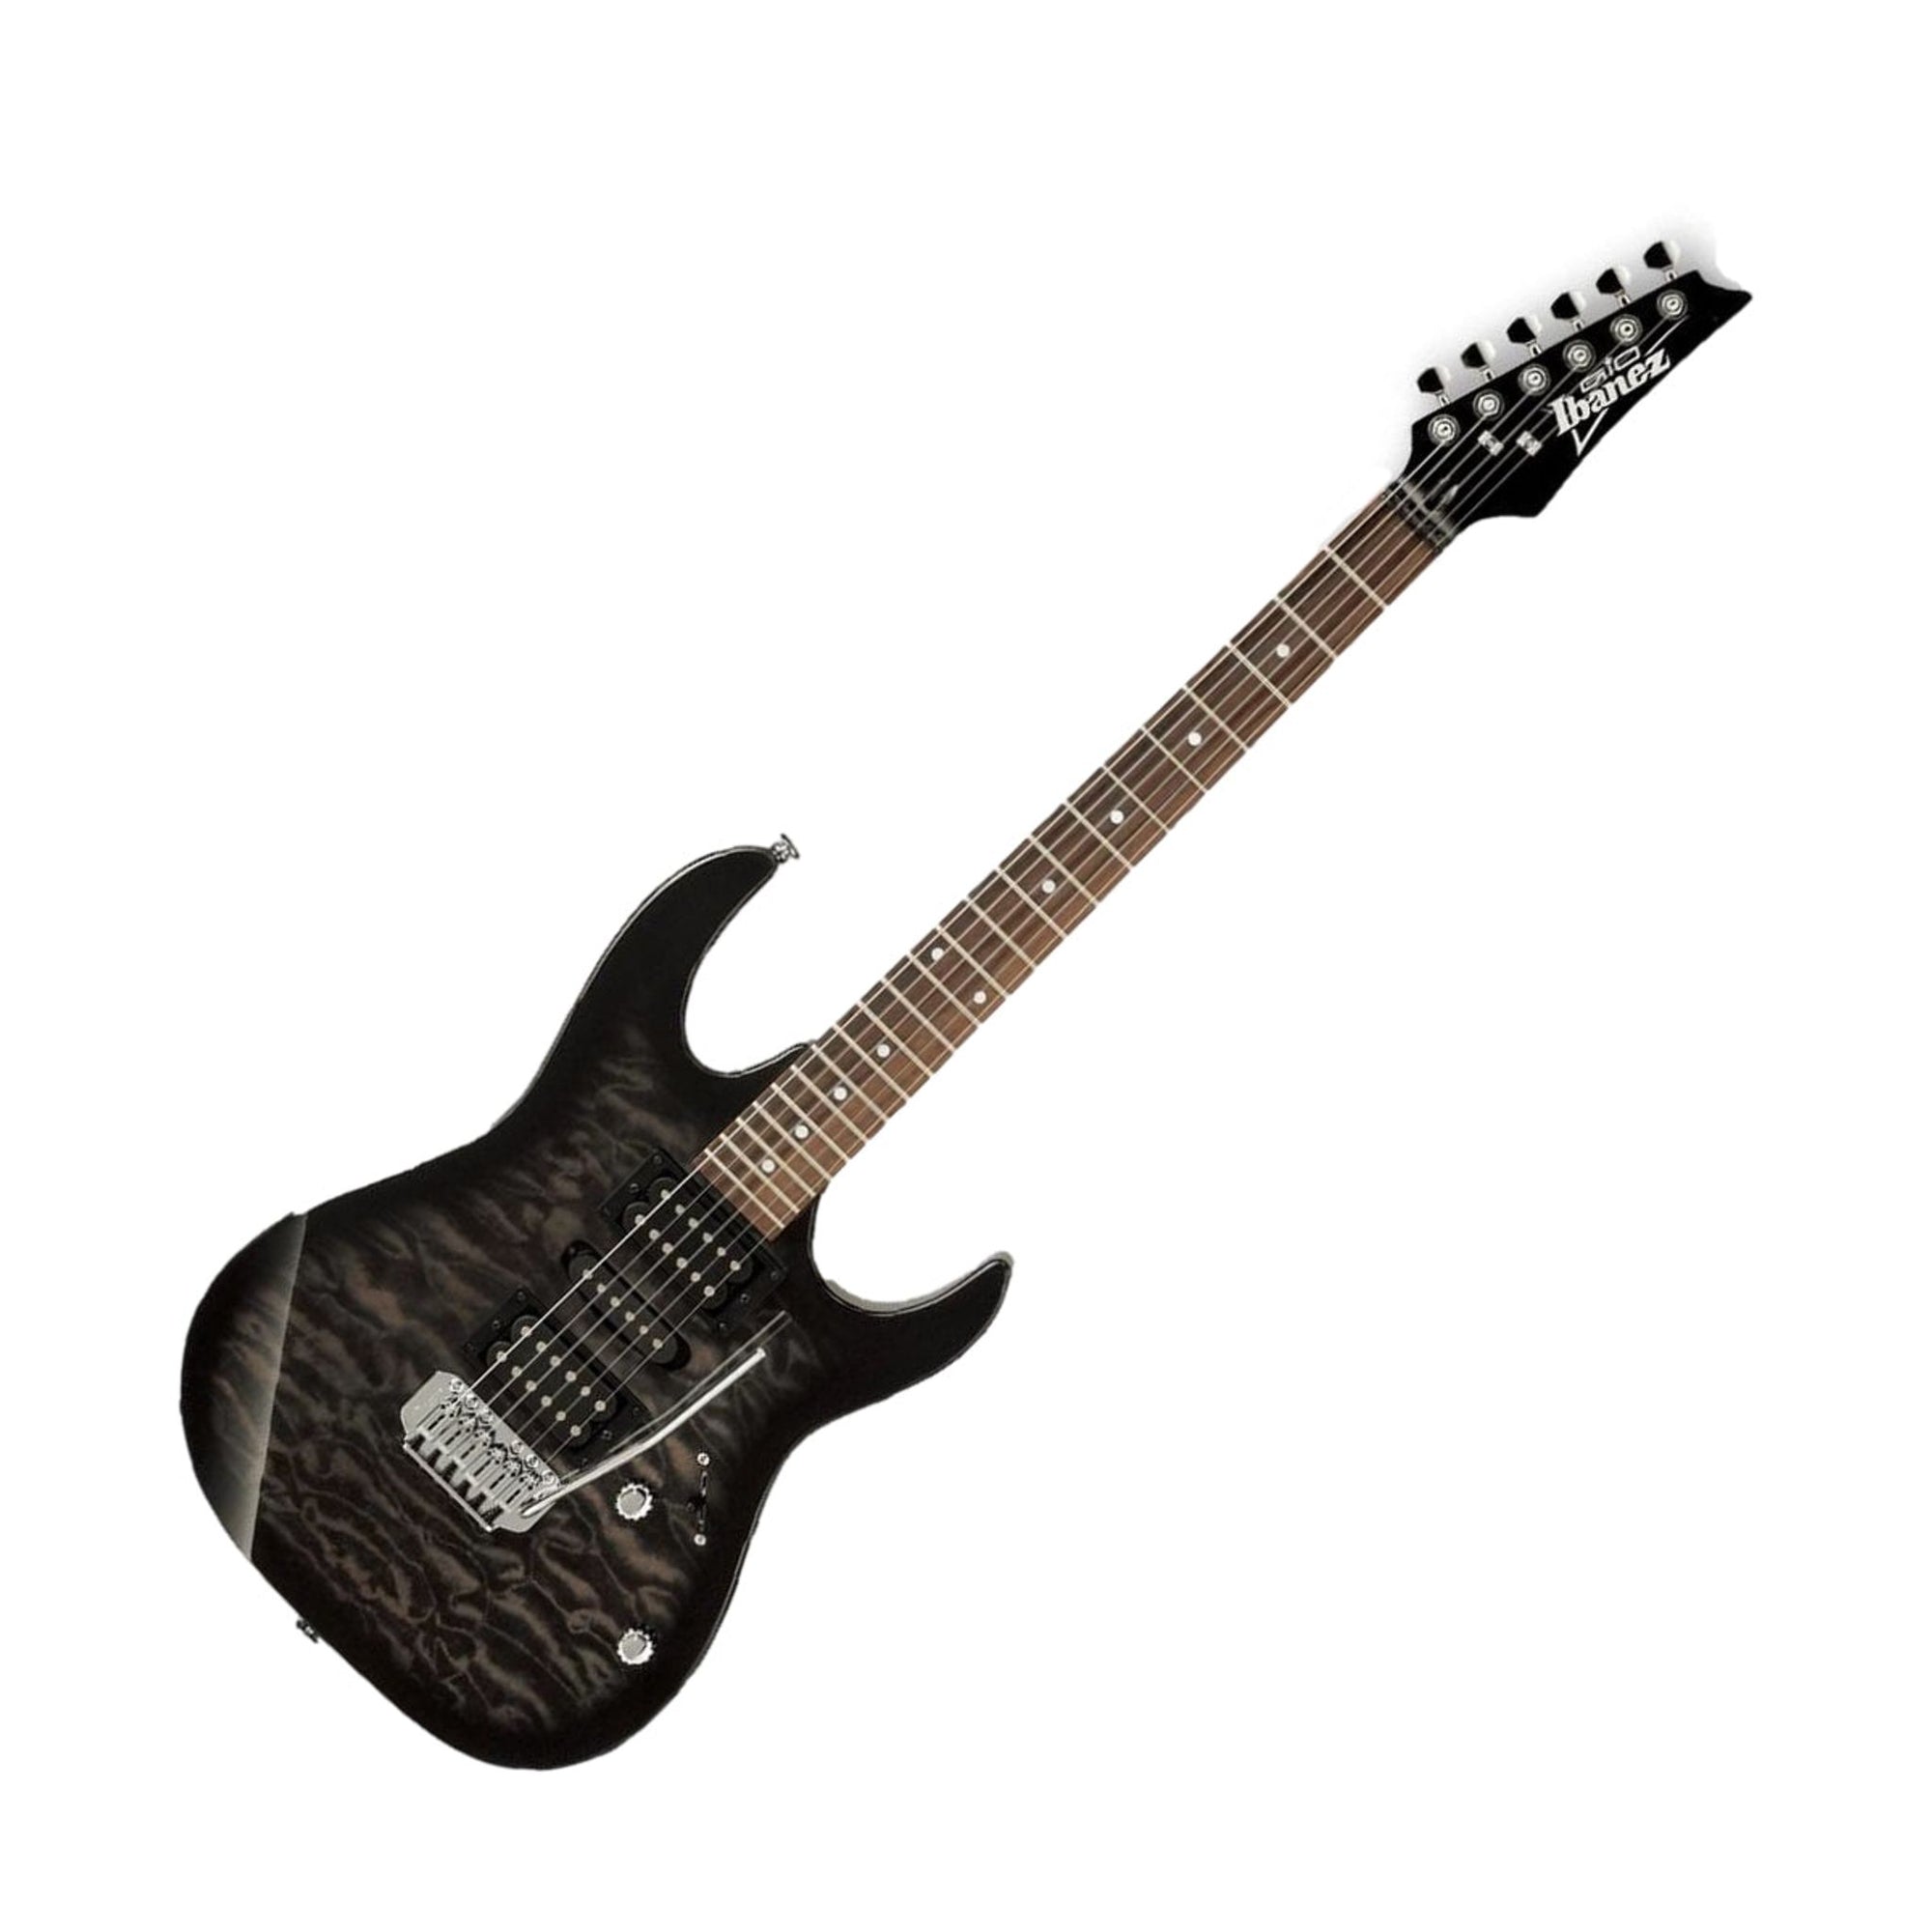 The Ibanez RX70QA Electric Guitar is a member of the GIO series which was developed for players who want Ibanez quality in a more affordable package.